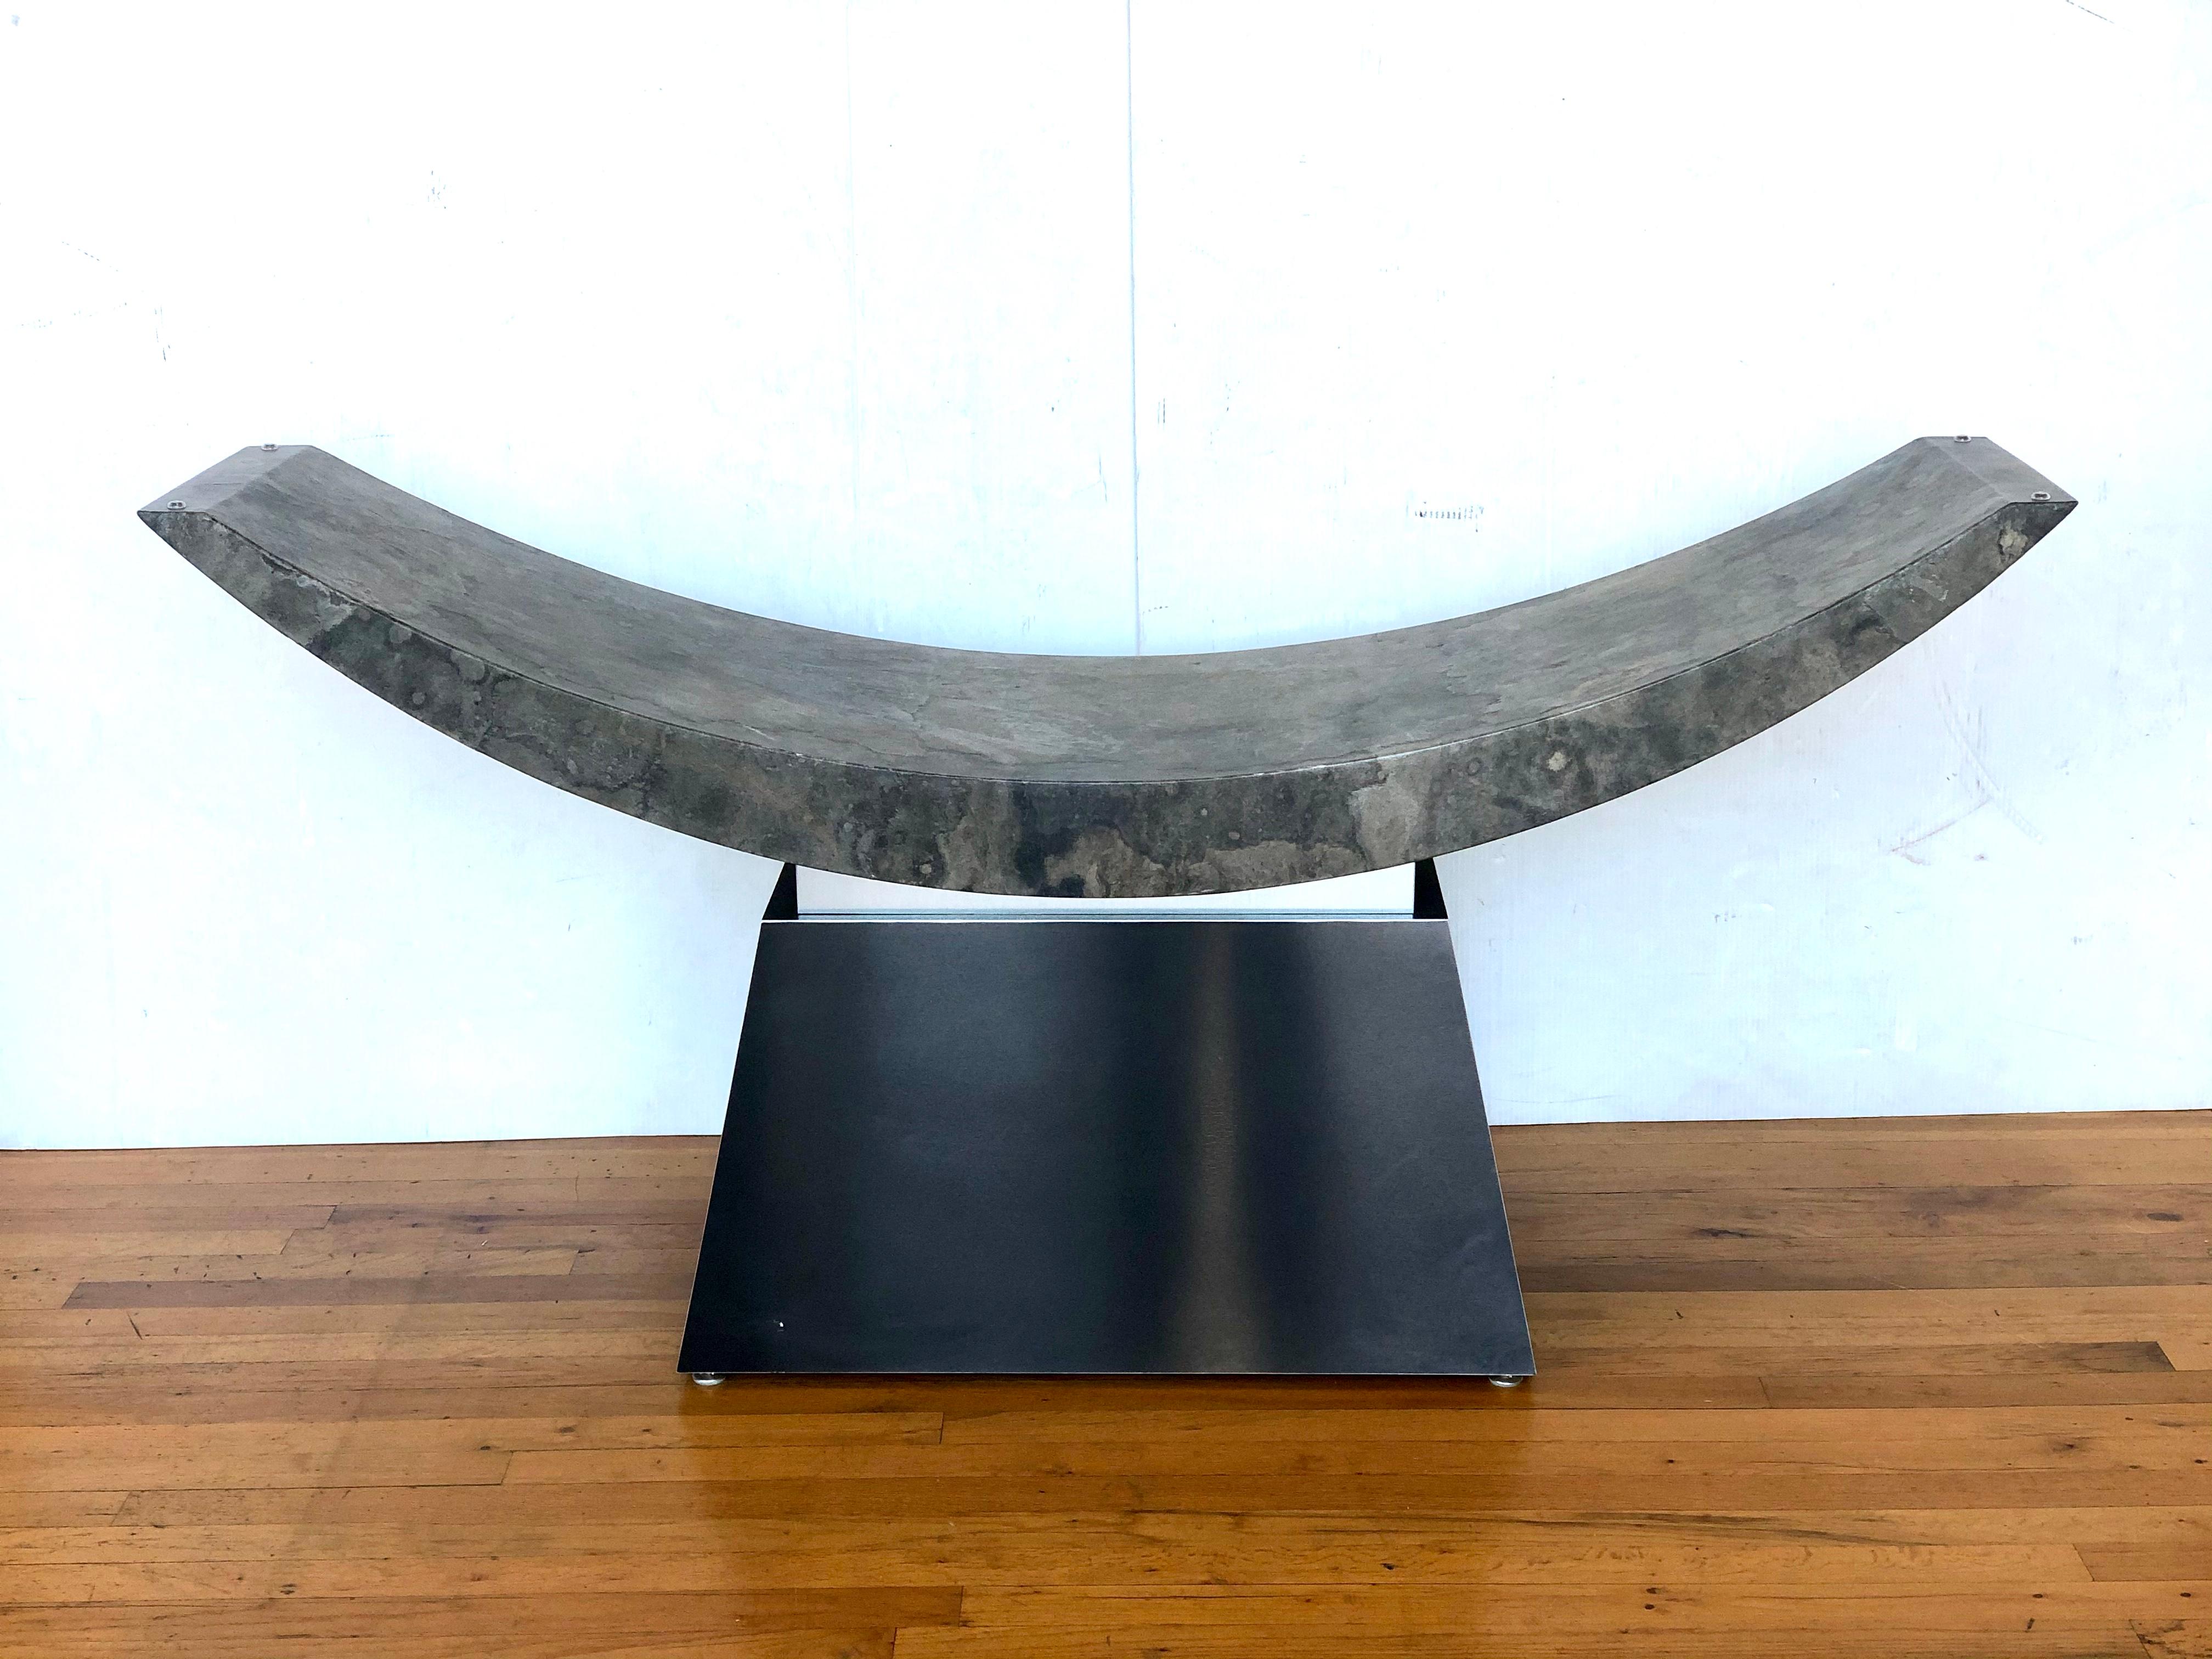 Beautiful massive large table base circa late 1980s, black laminate top with a mate finish and chrome accent band, with a curve faux marble finish, this piece can take a large oval rectangle glass and use it as a dining table or a thin large